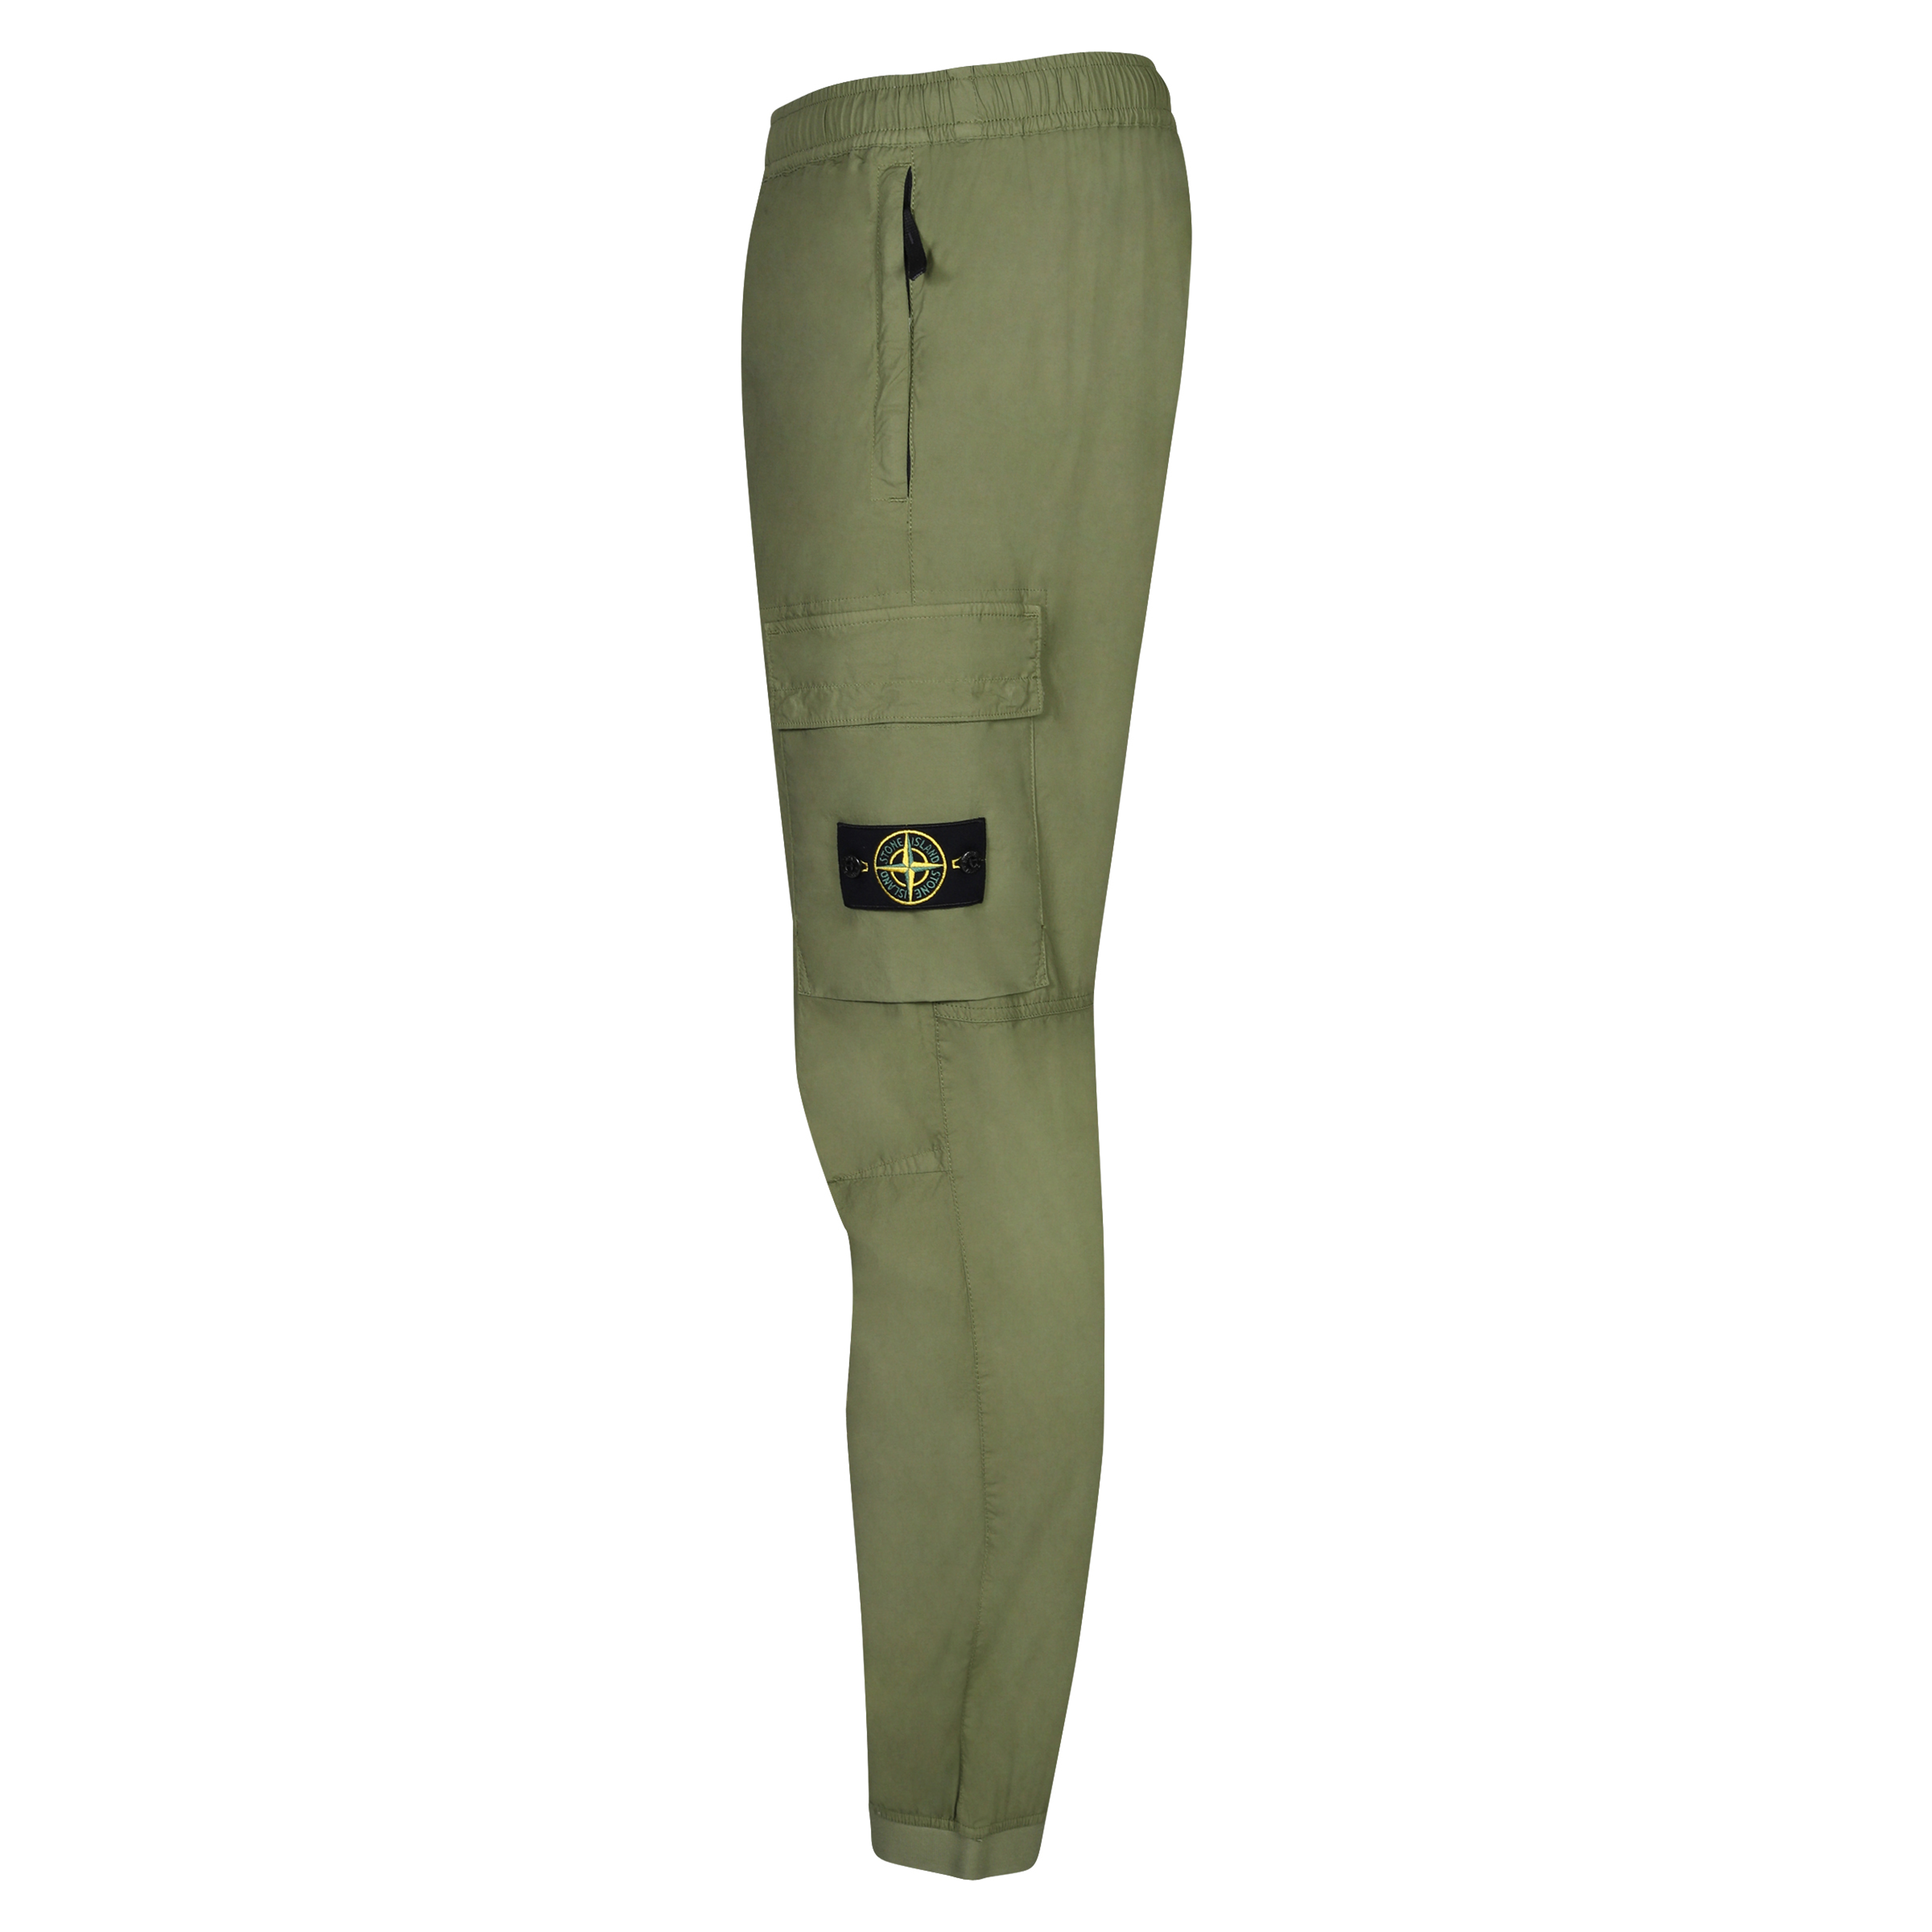 Stone Island Light Cargo Pant in Olive 33